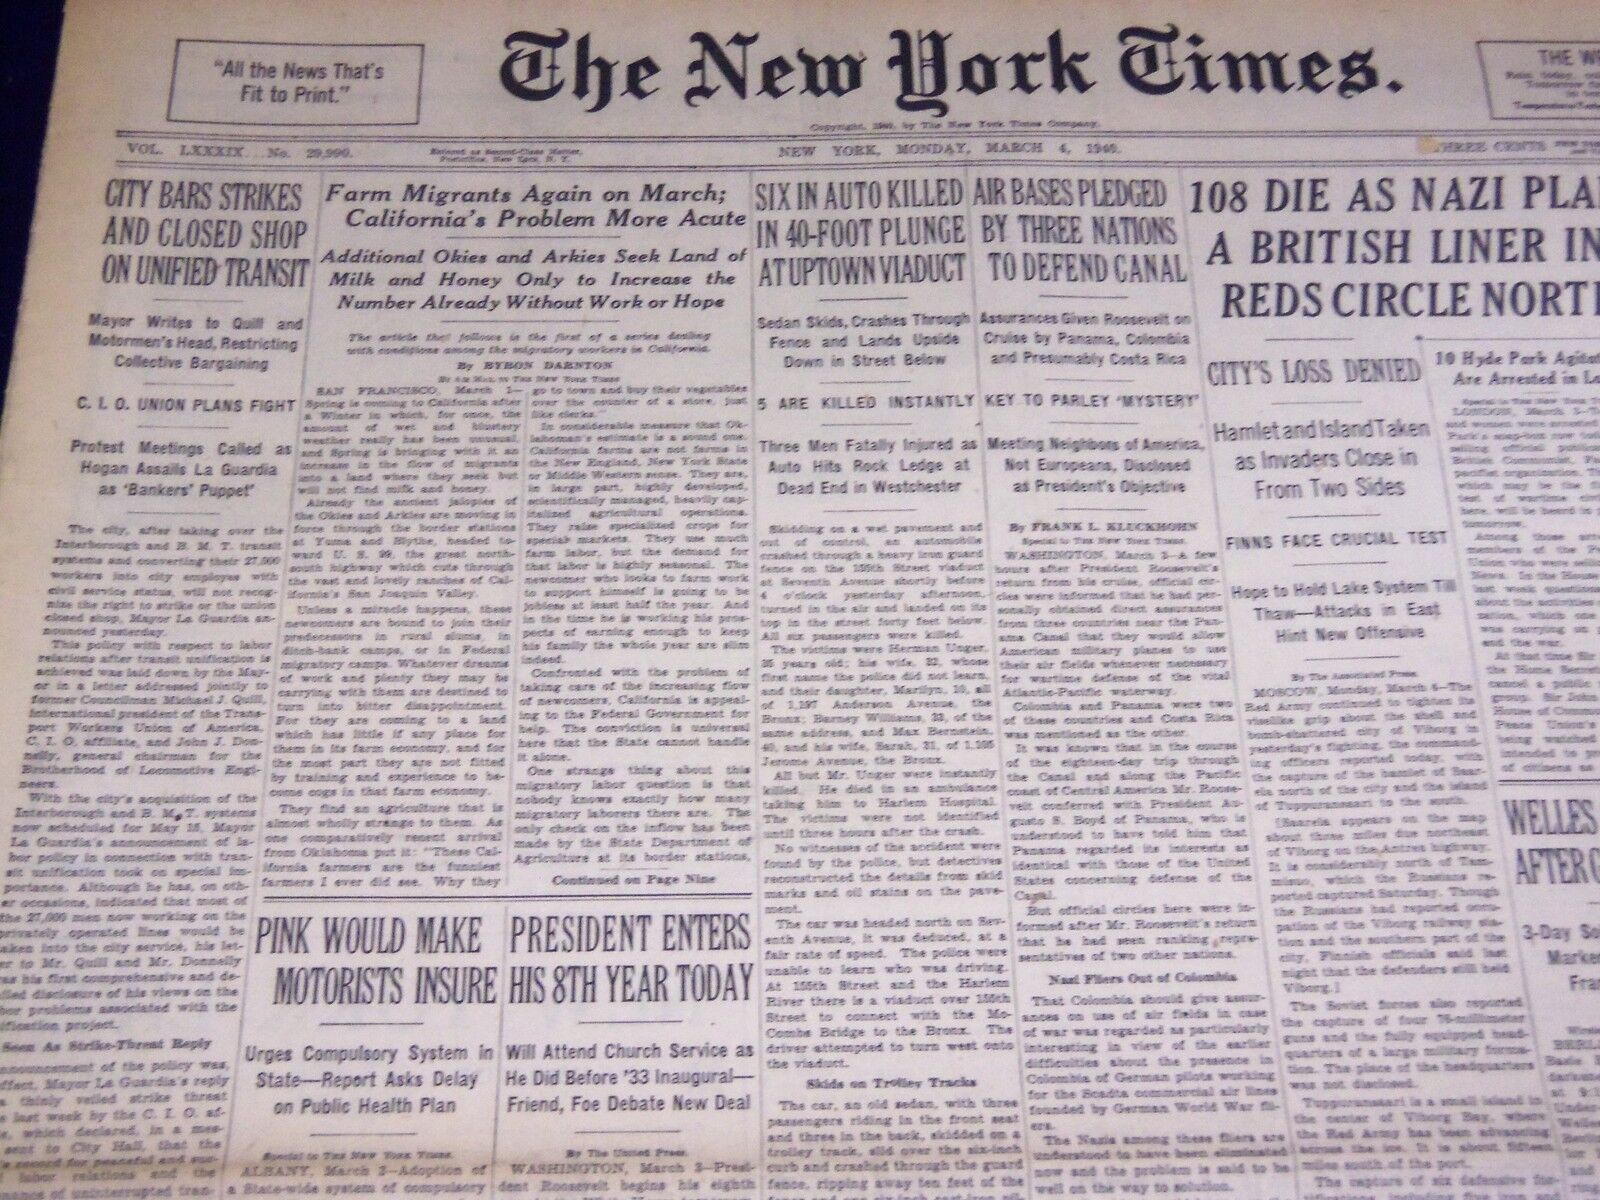 1940 MARCH 4 NEW YORK TIMES - FARM MIGRANTS TO CALIFORNIA - NT 2930